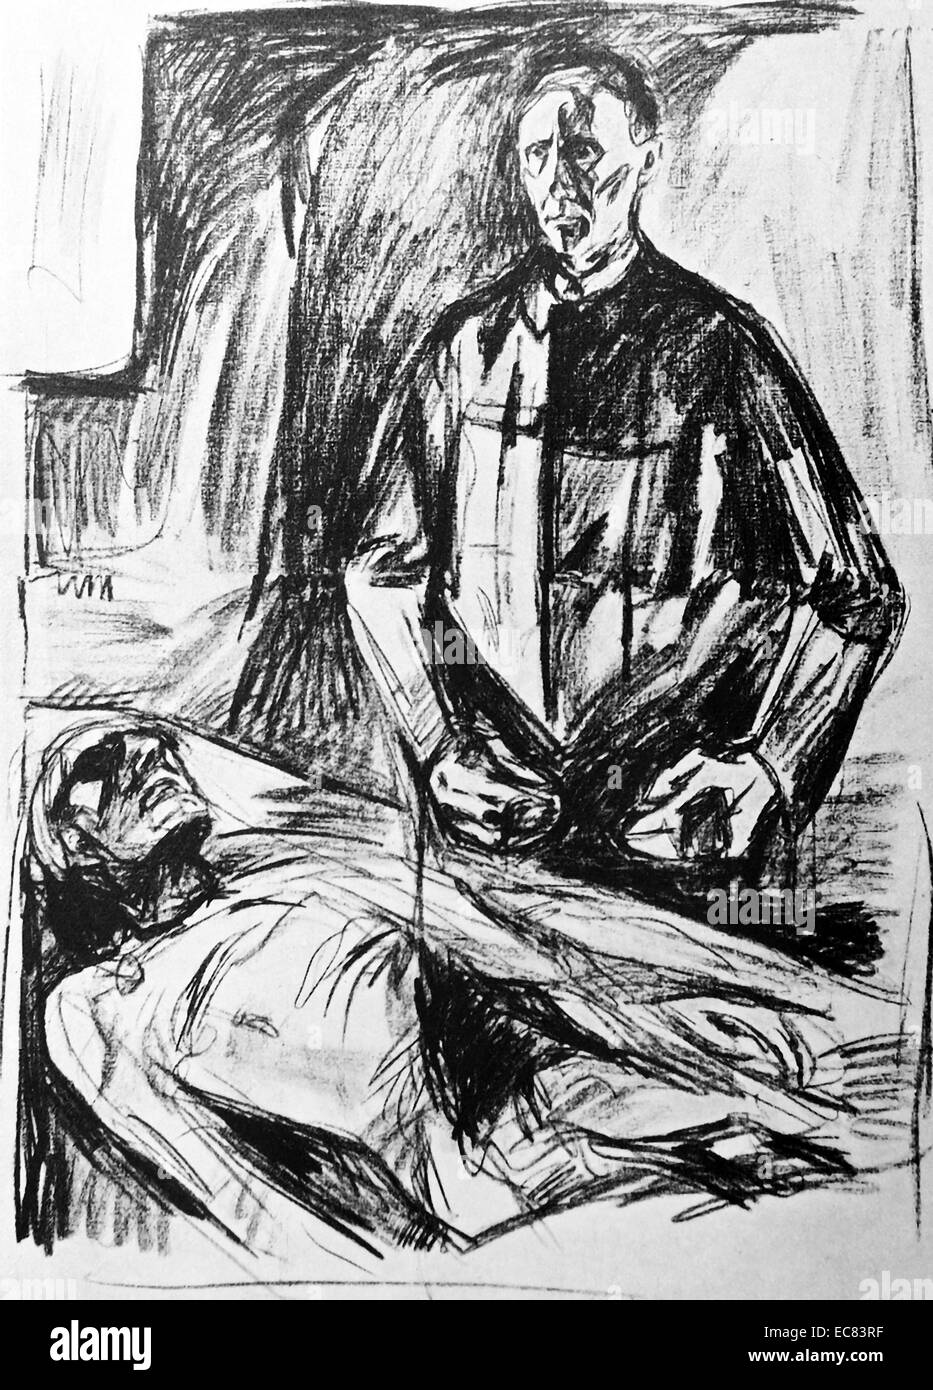 Marat's Death - (Prof. Schreiner and Munch's life) by the Norwegian artist Edvard Munch (1863-1944). This work was produced in 1930. Stock Photo